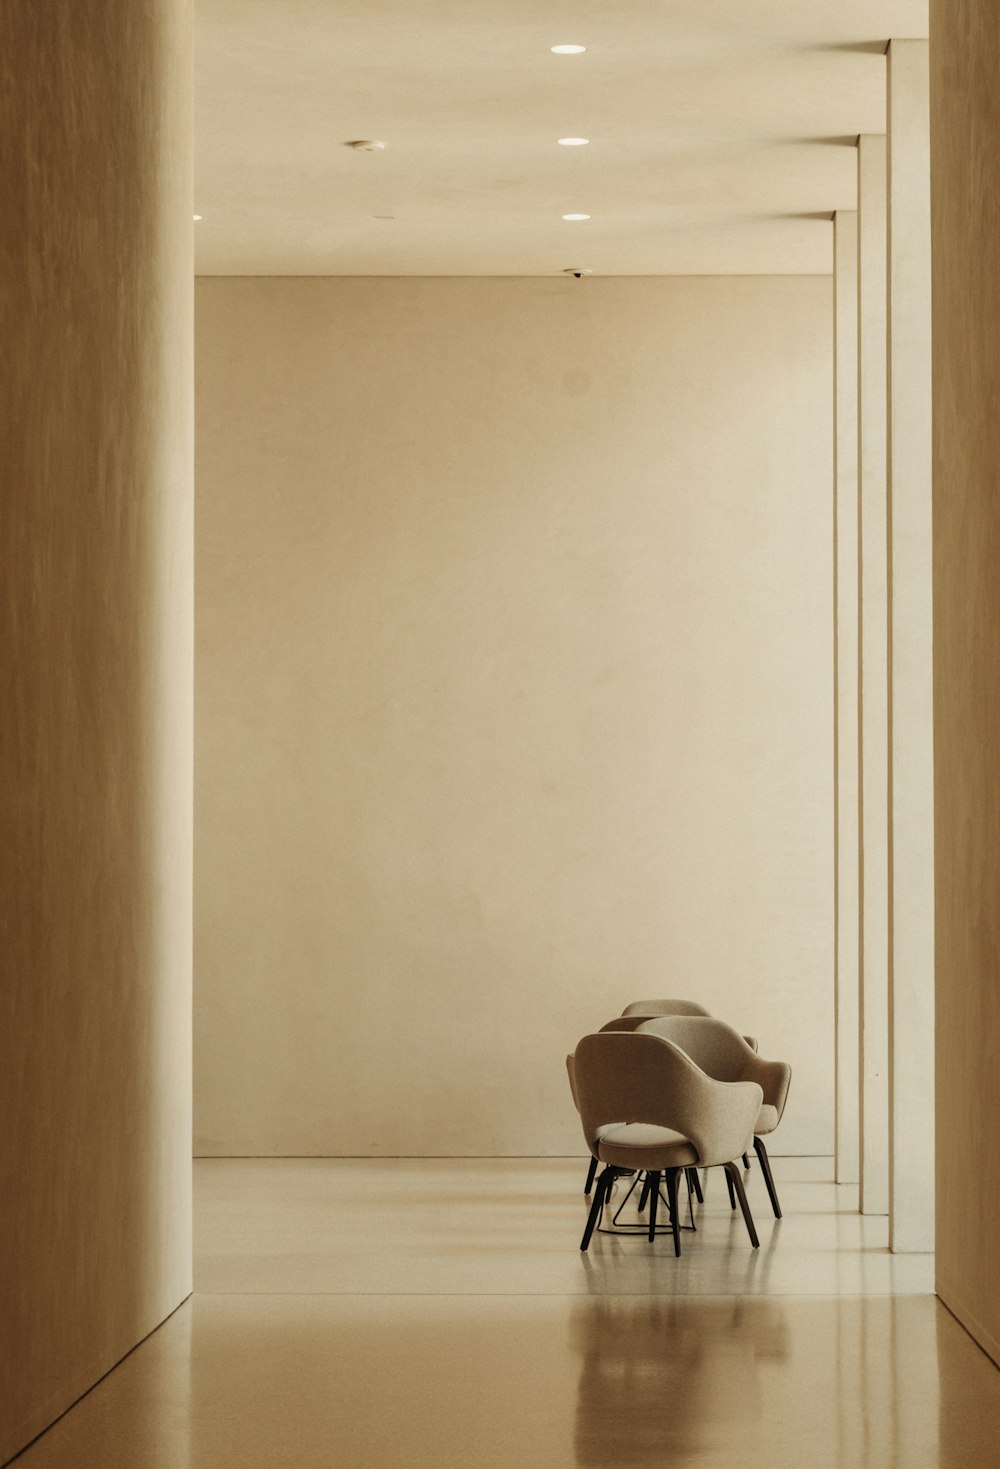 a chair in a room